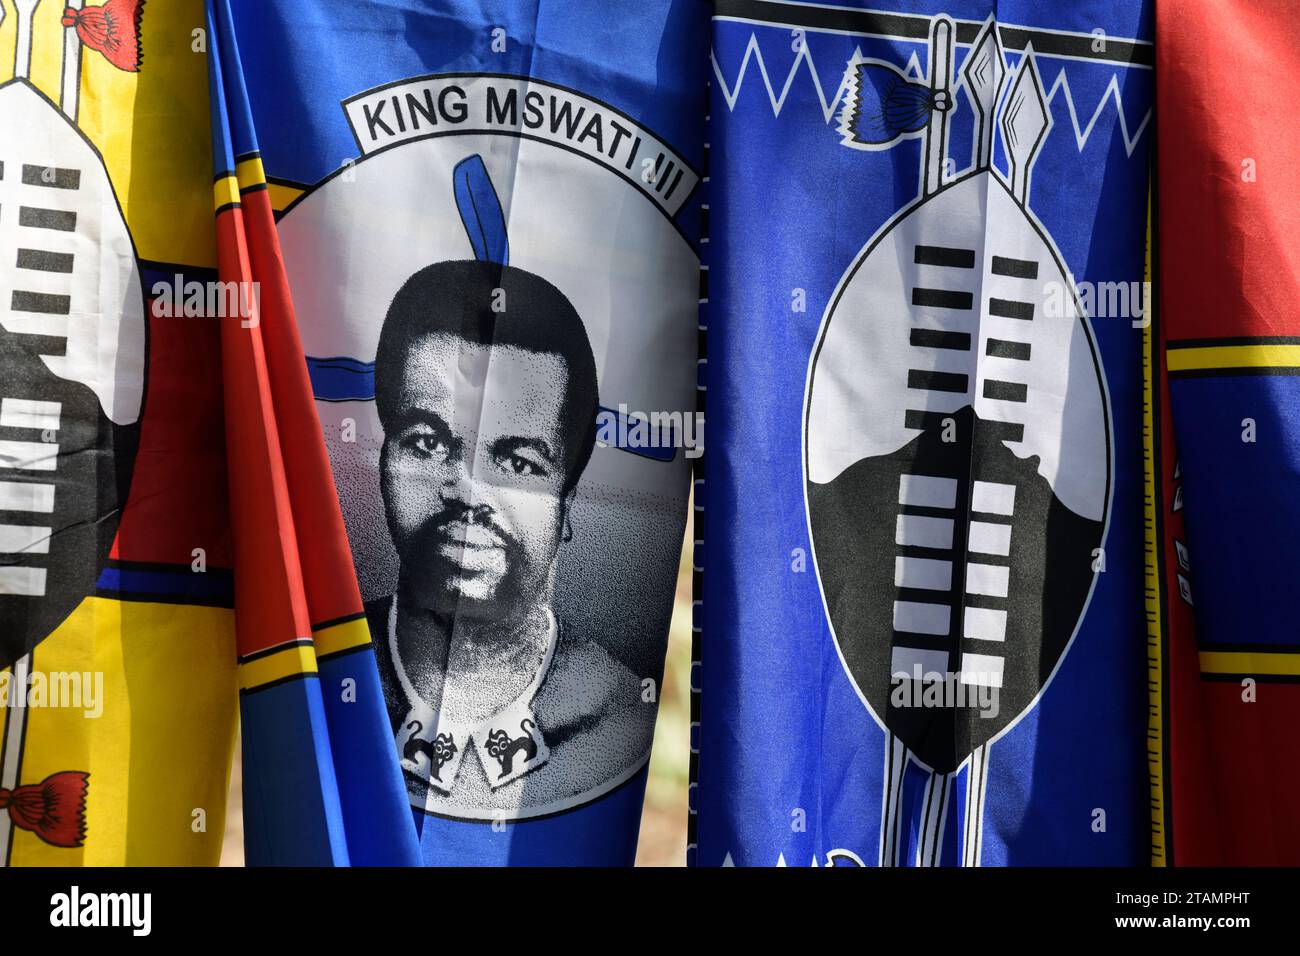 Face of King Mswati 3rd of Eswatini on screen  printed cloth, curio art for sale at Swazi Candles craft market, travel shopping, African art Stock Photo